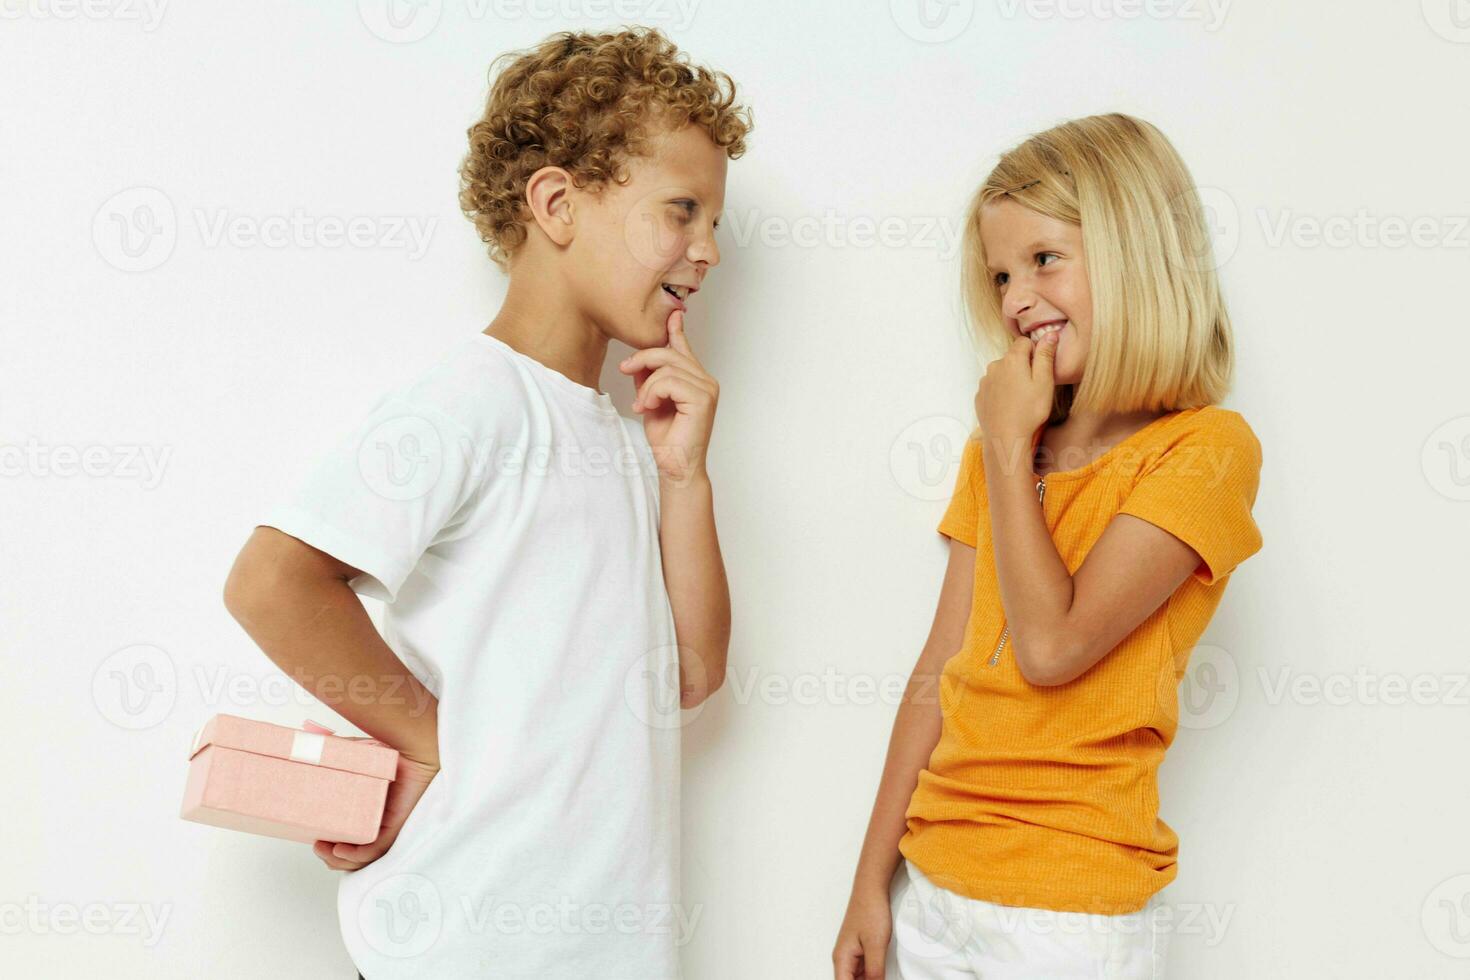 Boy and girl holiday friendship with a gift lifestyle unaltered photo